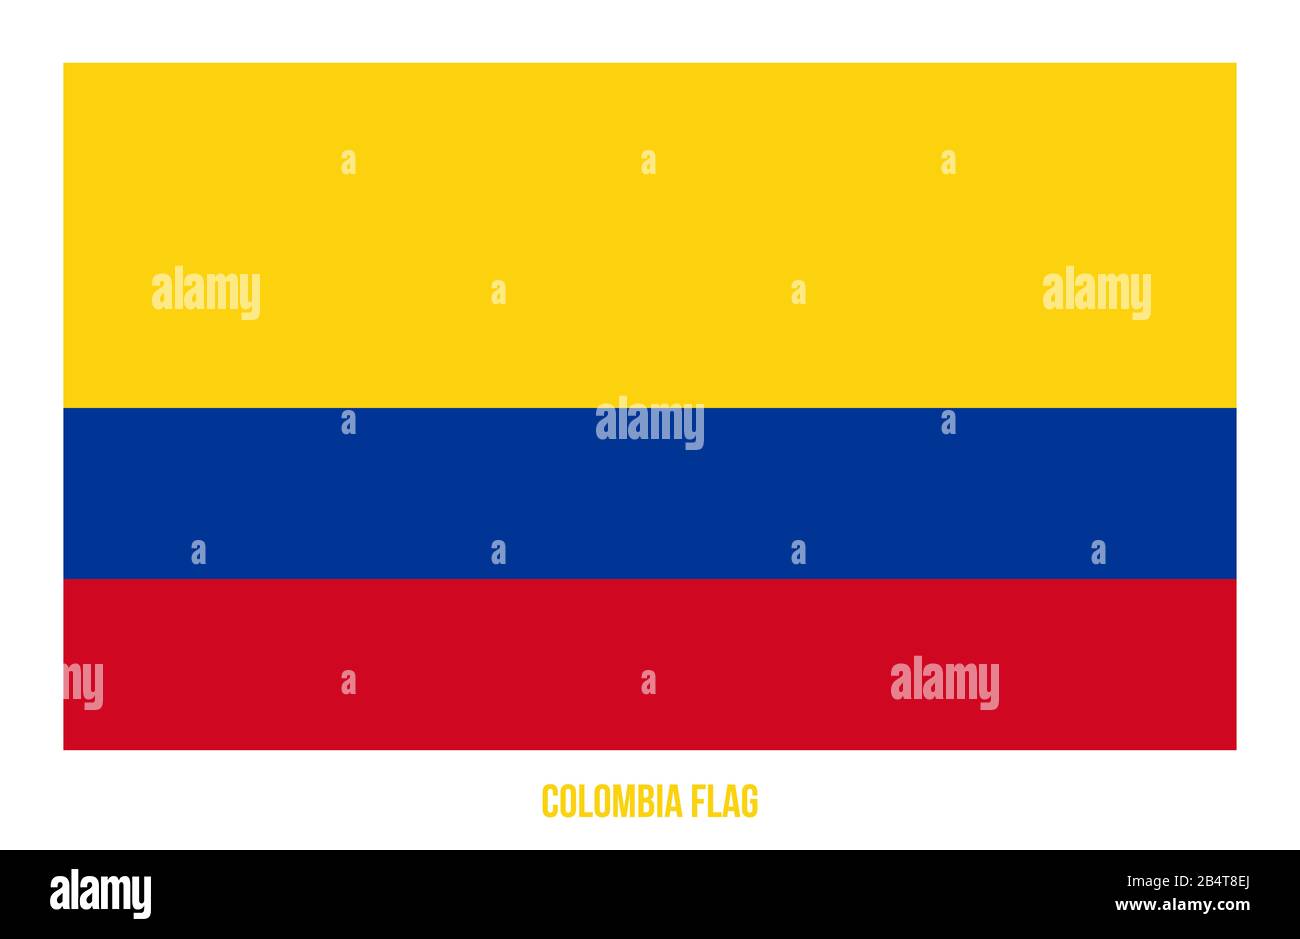 Colombia Flag Vector Illustration on White Background. Colombia National Flag. Stock Photo